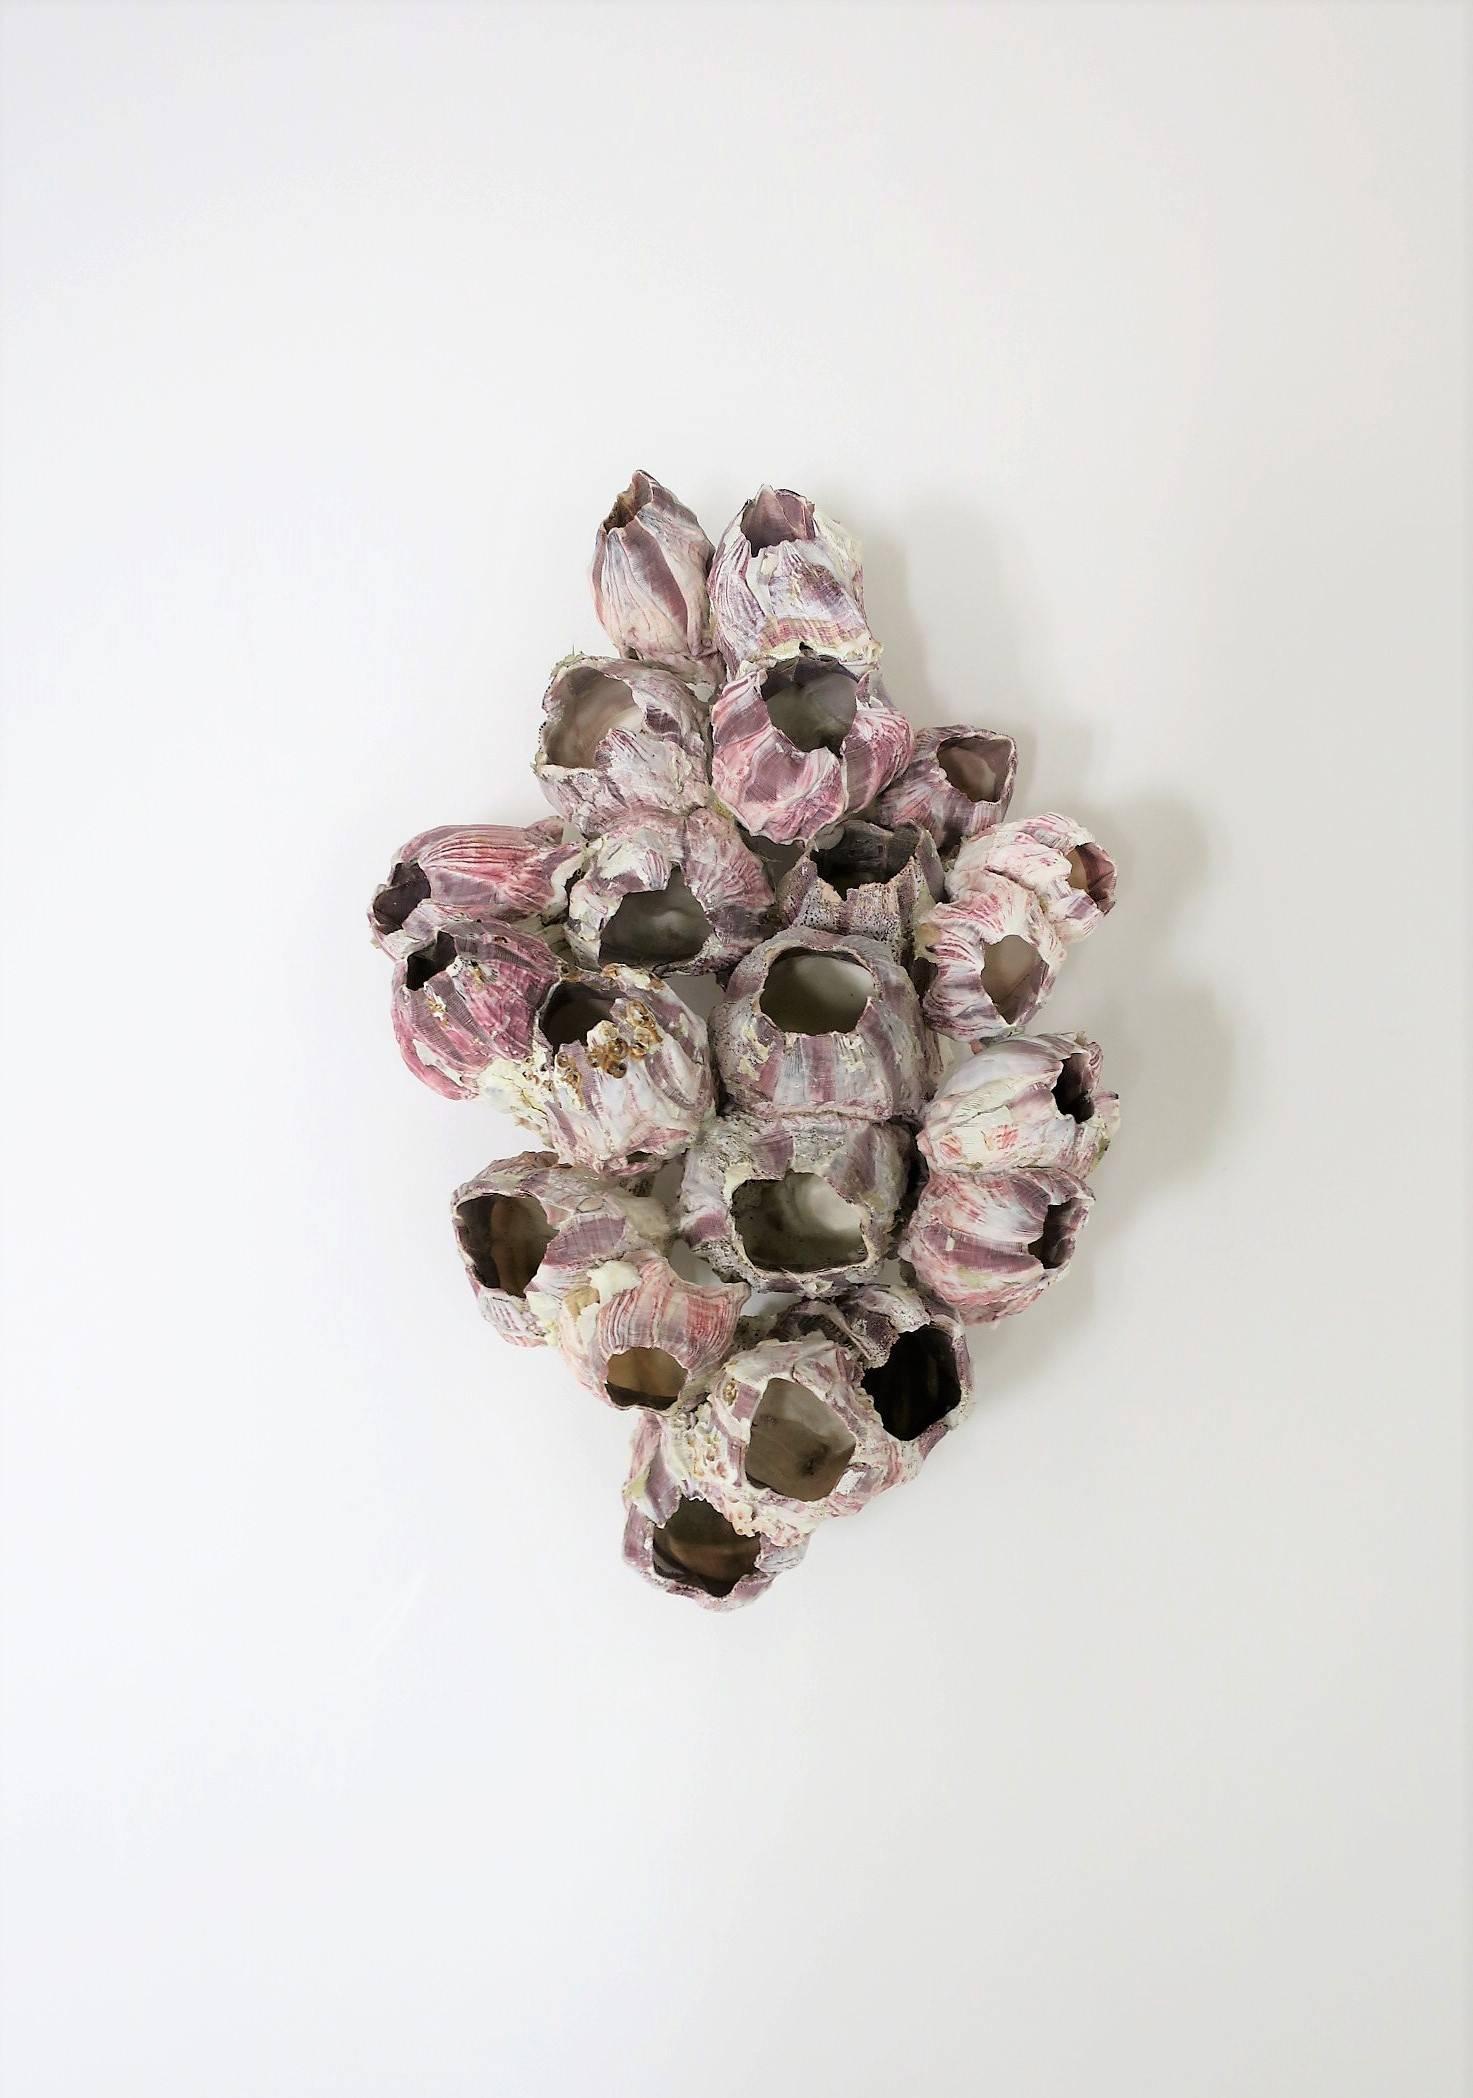 A beautiful vintage white and purple natural barnacle coral specimen sculpture piece. 
A real, very beautiful and relatively large, white and purple barnacle specimen sculpture decorative object. 

Piece measures: 9 in. x 12 in. x 6.25 in. H

Item